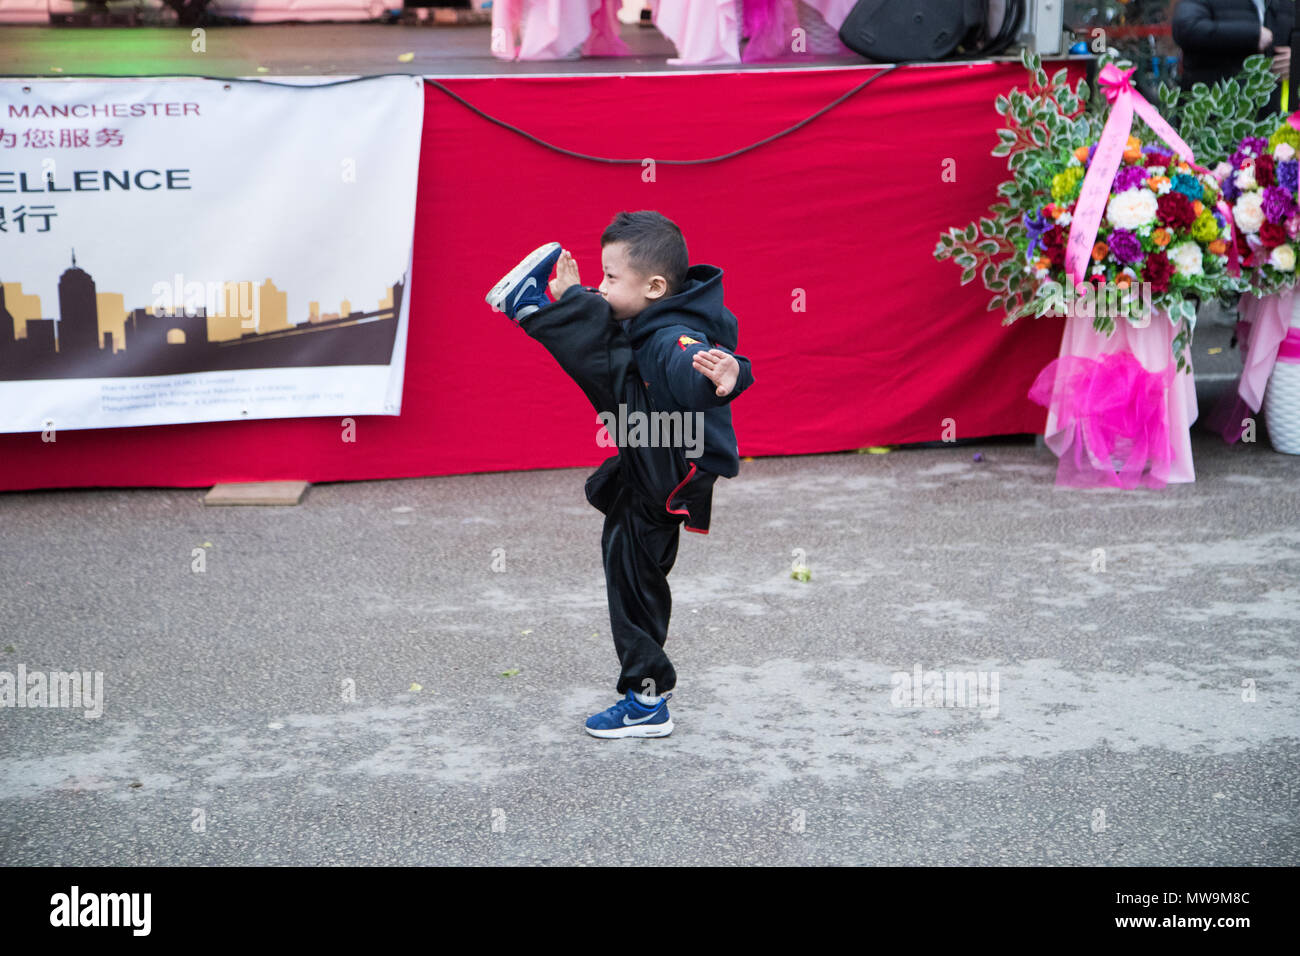 Celebrations at the Chinese New Year in Manchester, United Kingdom Stock Photo